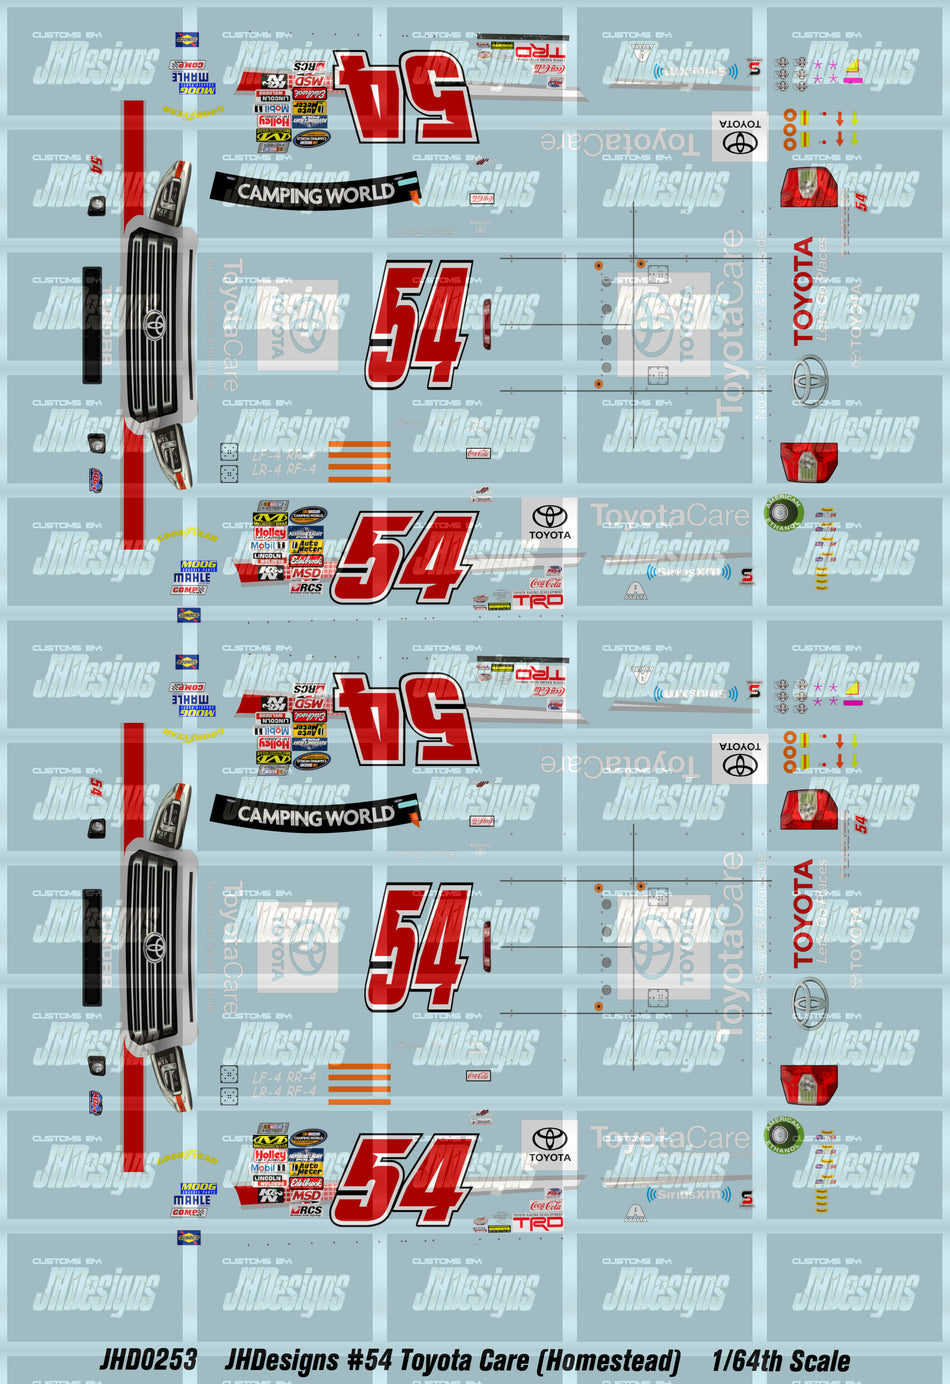 JH Designs Bubba Wallace 2014 CWTS #54 Toyota Care (Homestead Race) 1:64 Racecar Decal Set